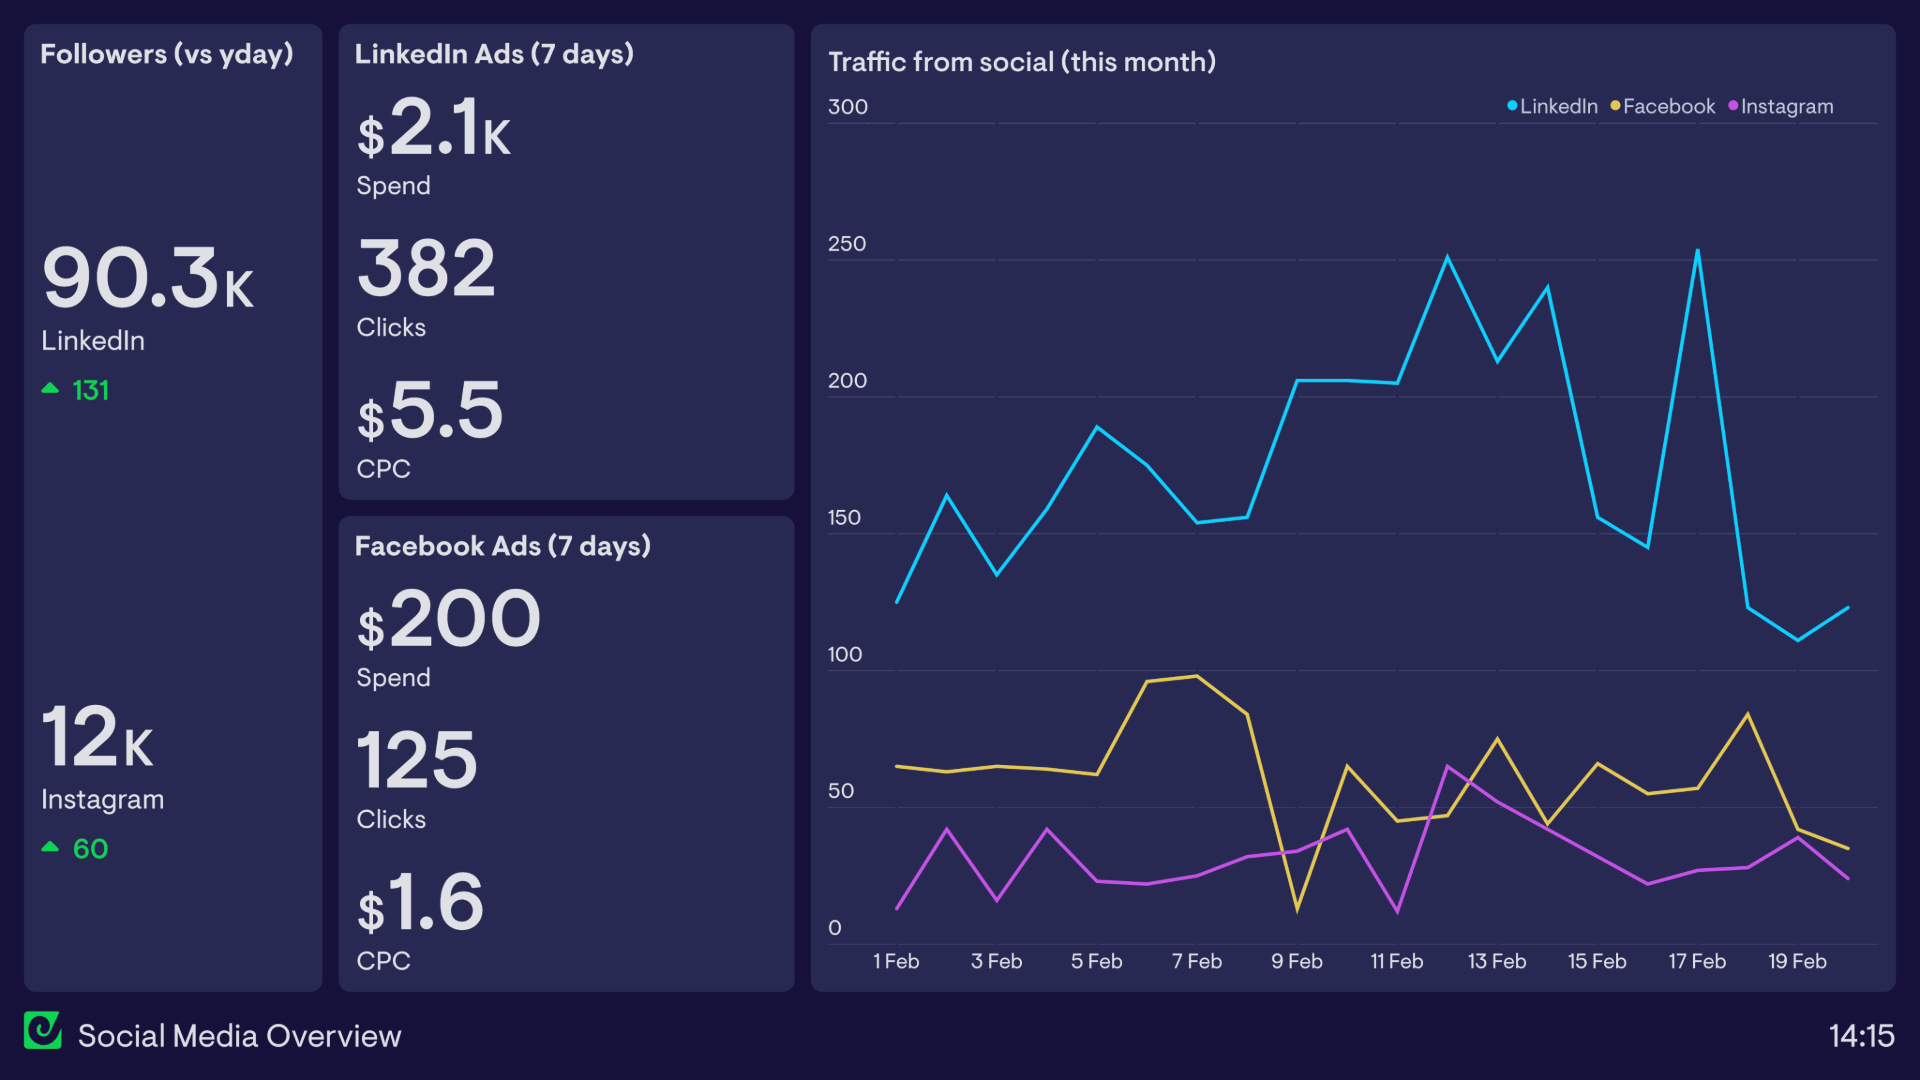 Example of a dashboard used by track social media metrics from LinkedIn, Facebook and Instagram